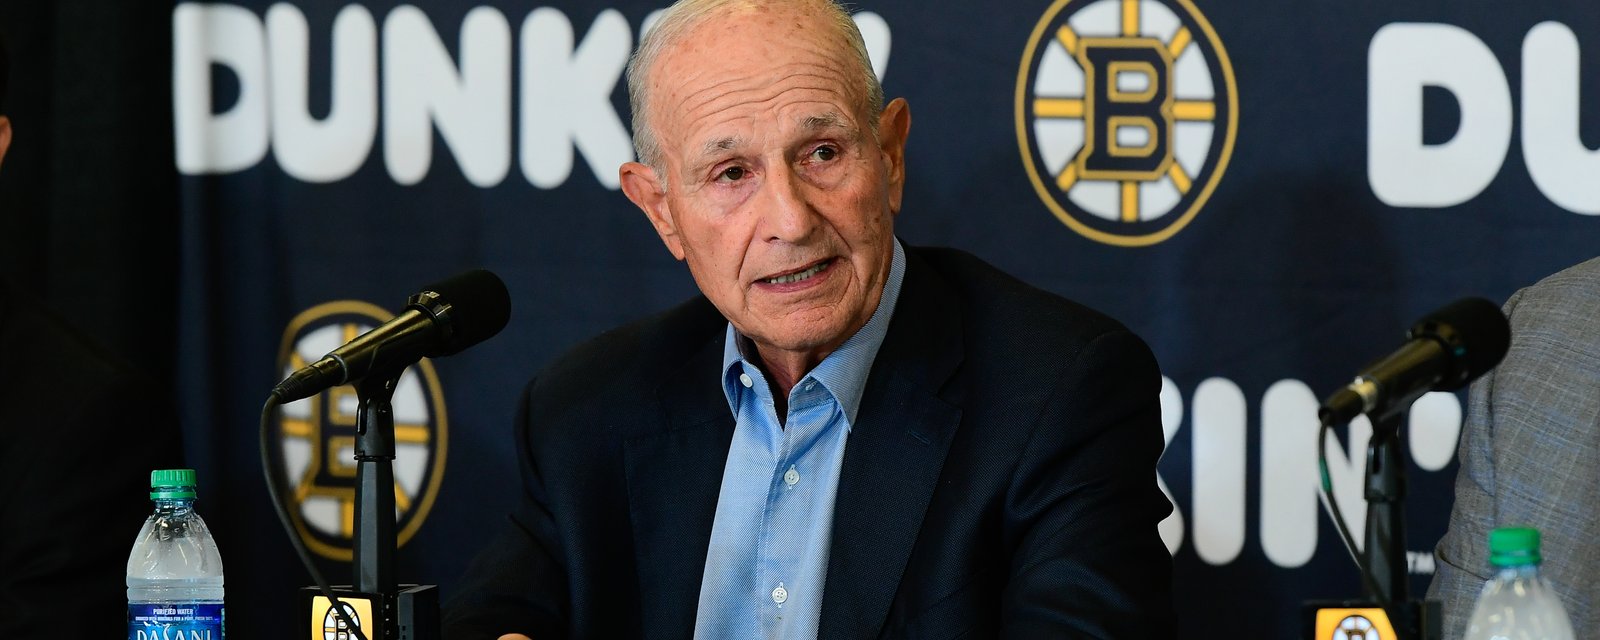 Anger shifts to Bruins' ownership in COVID-19 pay story